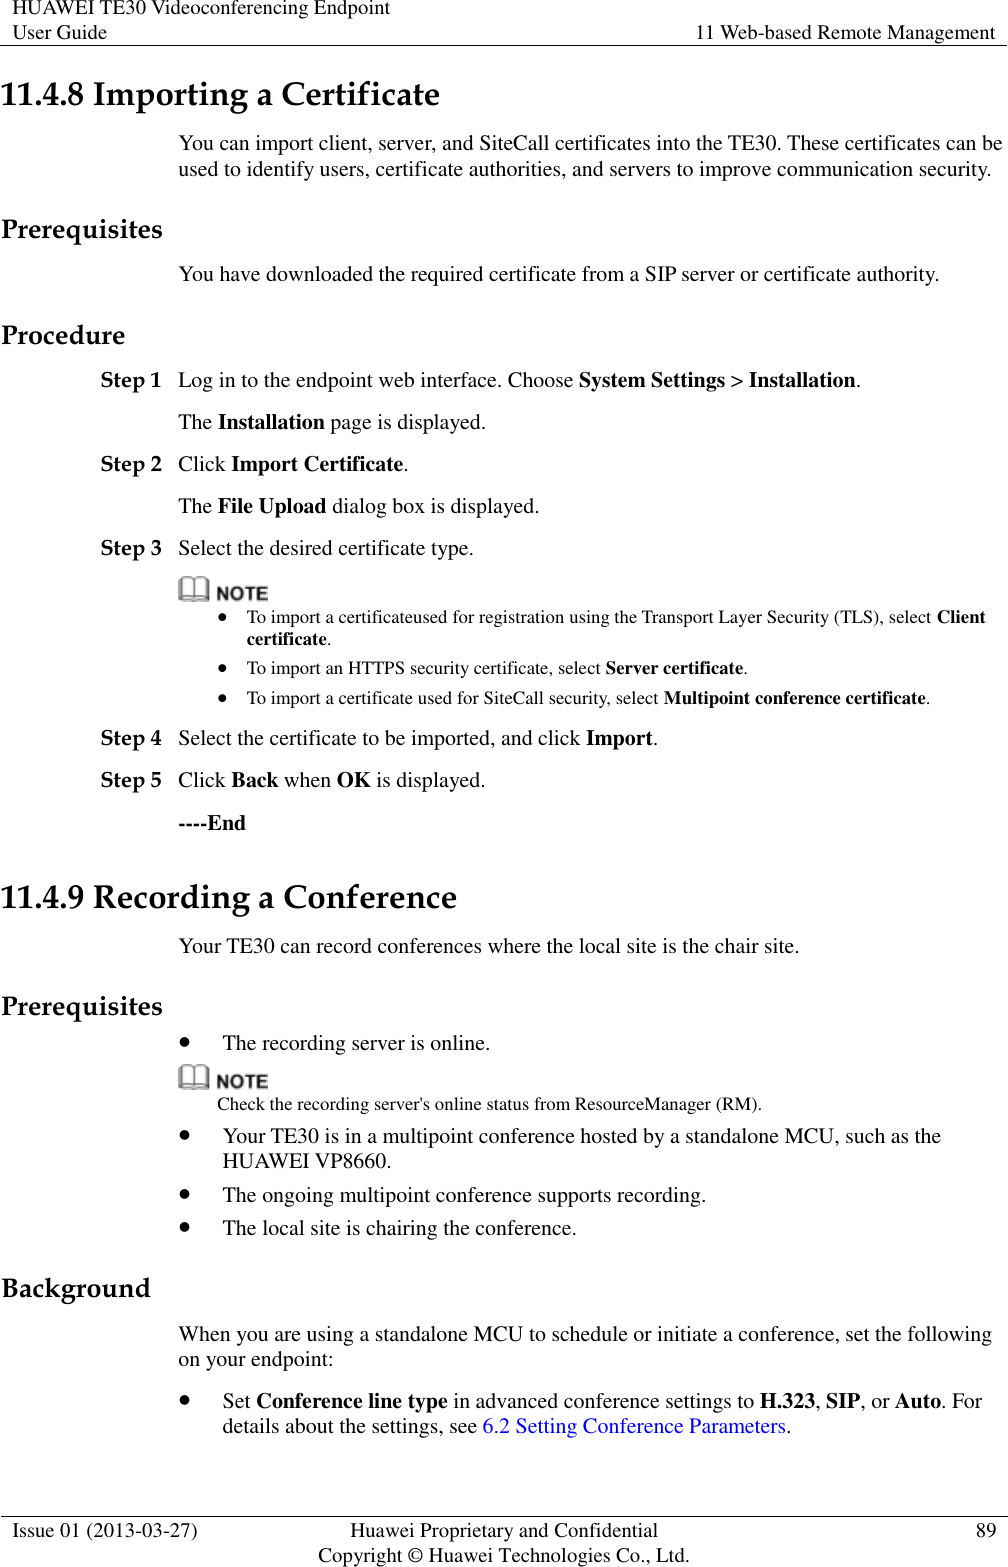 HUAWEI TE30 Videoconferencing Endpoint User Guide 11 Web-based Remote Management  Issue 01 (2013-03-27) Huawei Proprietary and Confidential                                     Copyright © Huawei Technologies Co., Ltd. 89  11.4.8 Importing a Certificate You can import client, server, and SiteCall certificates into the TE30. These certificates can be used to identify users, certificate authorities, and servers to improve communication security. Prerequisites You have downloaded the required certificate from a SIP server or certificate authority. Procedure Step 1 Log in to the endpoint web interface. Choose System Settings &gt; Installation. The Installation page is displayed. Step 2 Click Import Certificate.   The File Upload dialog box is displayed. Step 3 Select the desired certificate type.   To import a certificateused for registration using the Transport Layer Security (TLS), select Client certificate.  To import an HTTPS security certificate, select Server certificate.  To import a certificate used for SiteCall security, select Multipoint conference certificate. Step 4 Select the certificate to be imported, and click Import. Step 5 Click Back when OK is displayed. ----End 11.4.9 Recording a Conference Your TE30 can record conferences where the local site is the chair site. Prerequisites  The recording server is online.  Check the recording server&apos;s online status from ResourceManager (RM).  Your TE30 is in a multipoint conference hosted by a standalone MCU, such as the HUAWEI VP8660.  The ongoing multipoint conference supports recording.  The local site is chairing the conference. Background When you are using a standalone MCU to schedule or initiate a conference, set the following on your endpoint:  Set Conference line type in advanced conference settings to H.323, SIP, or Auto. For details about the settings, see 6.2 Setting Conference Parameters. 